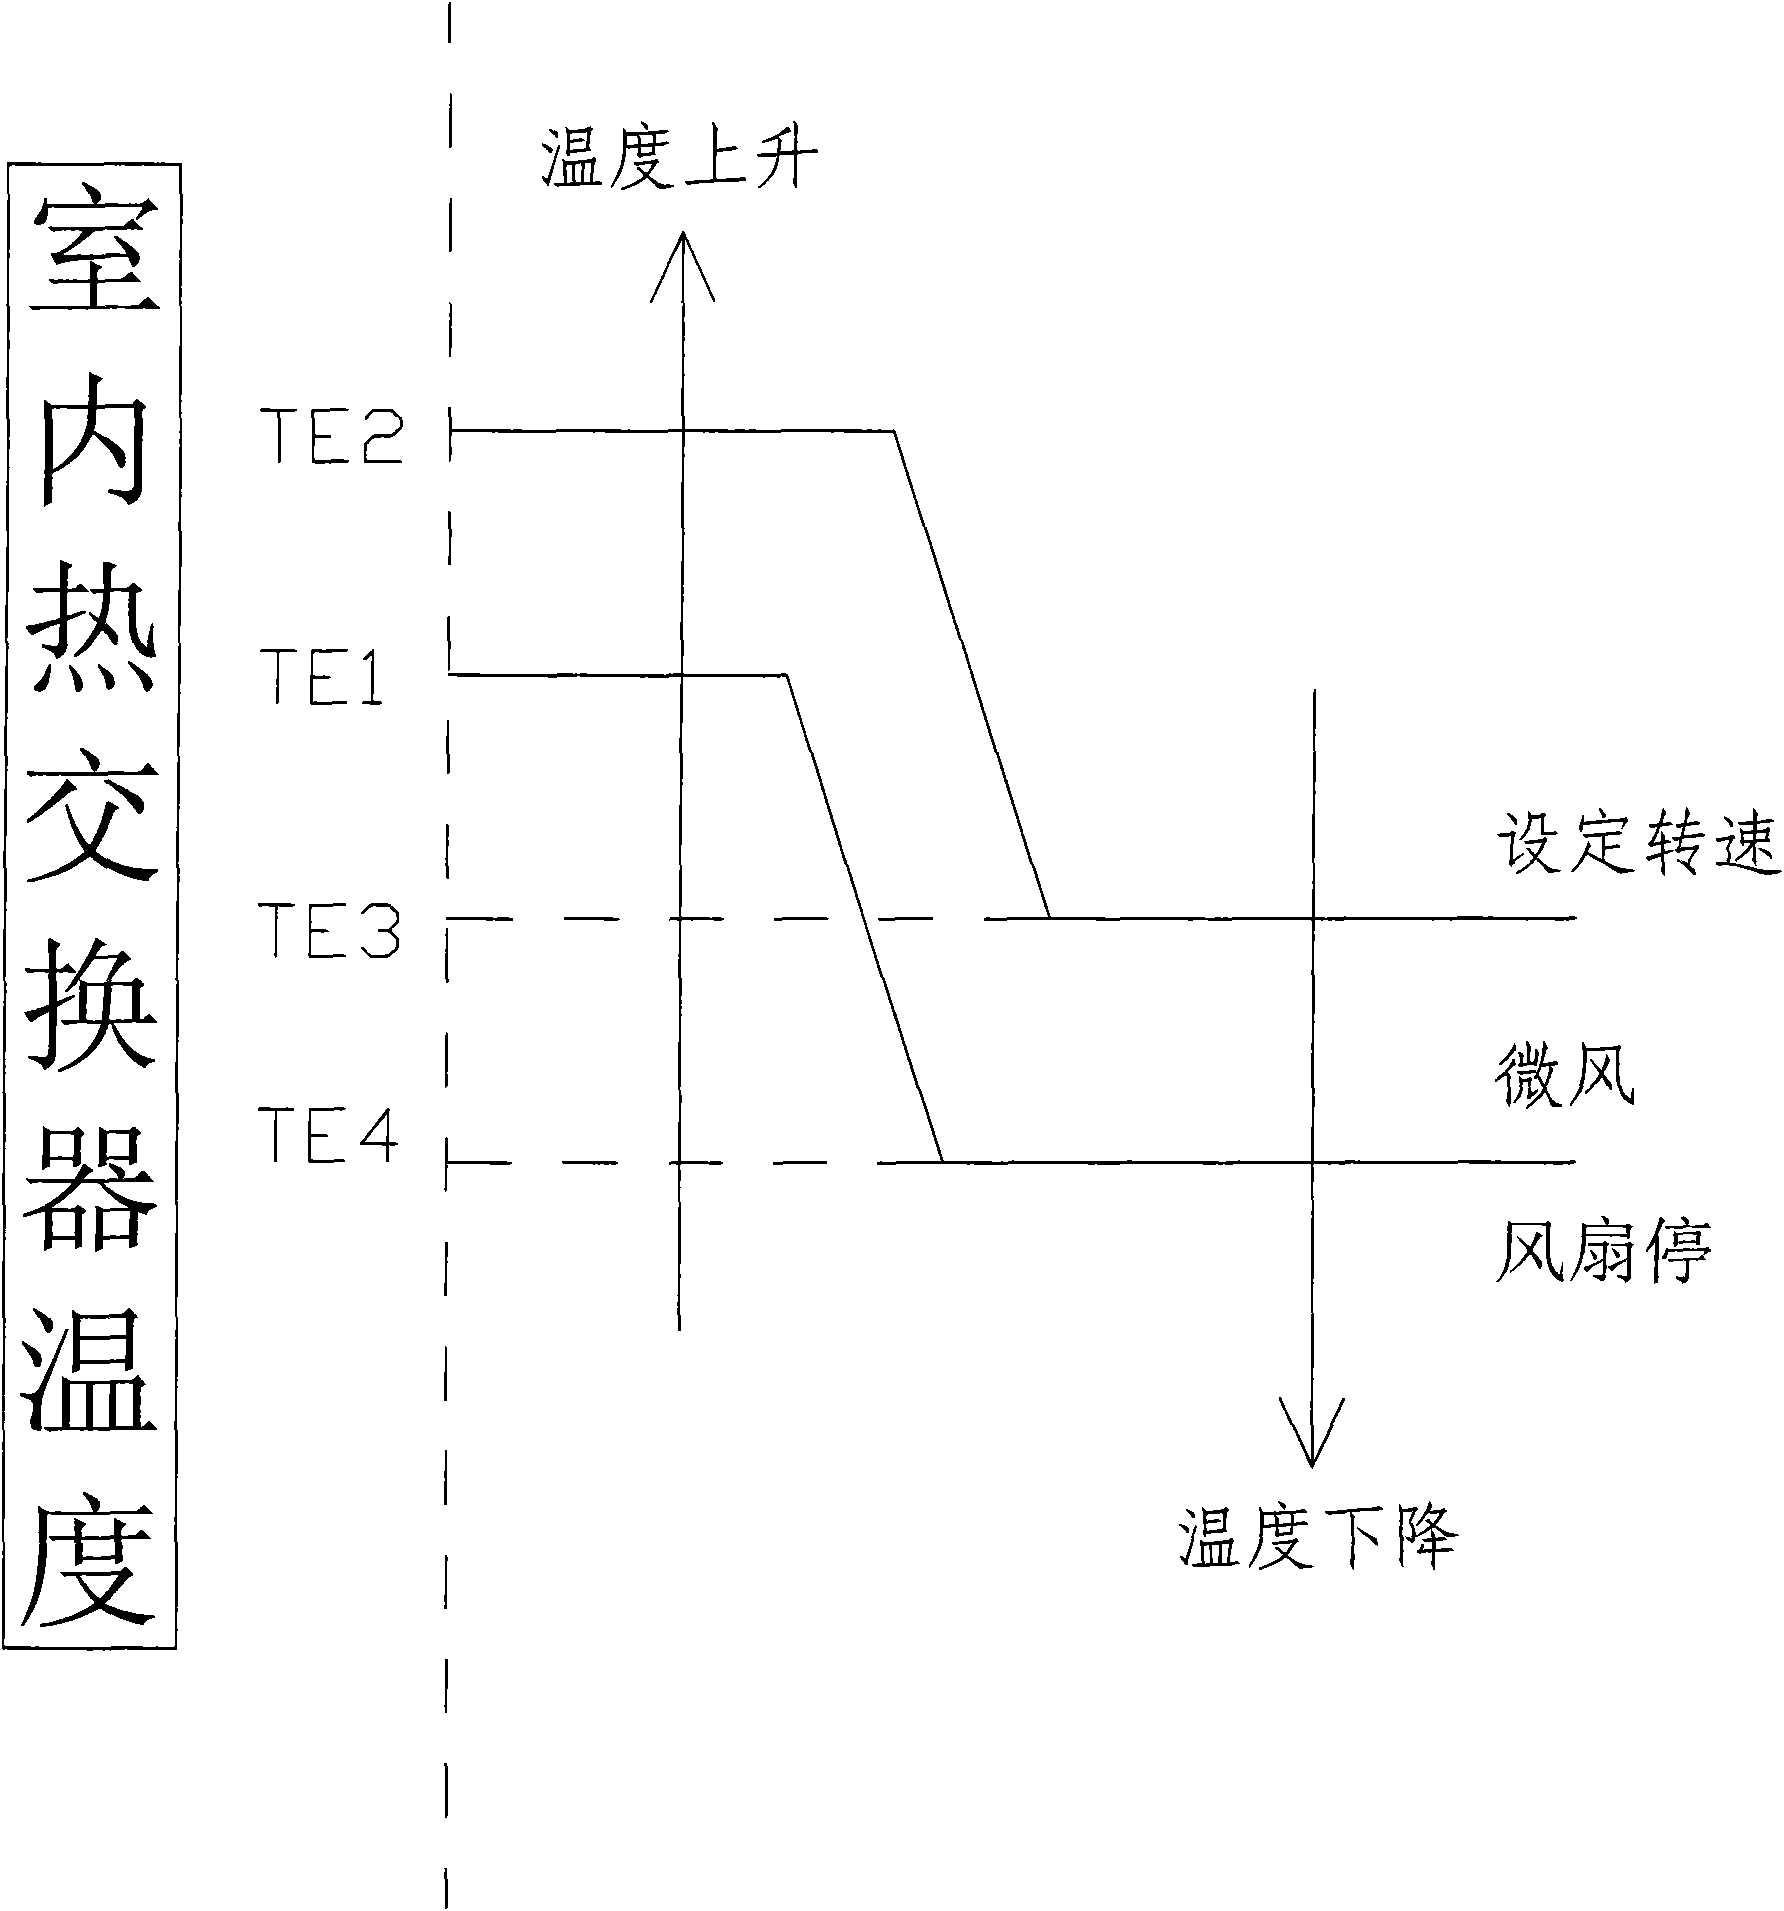 Control method for improving outlet air temperature comfort of air conditioner